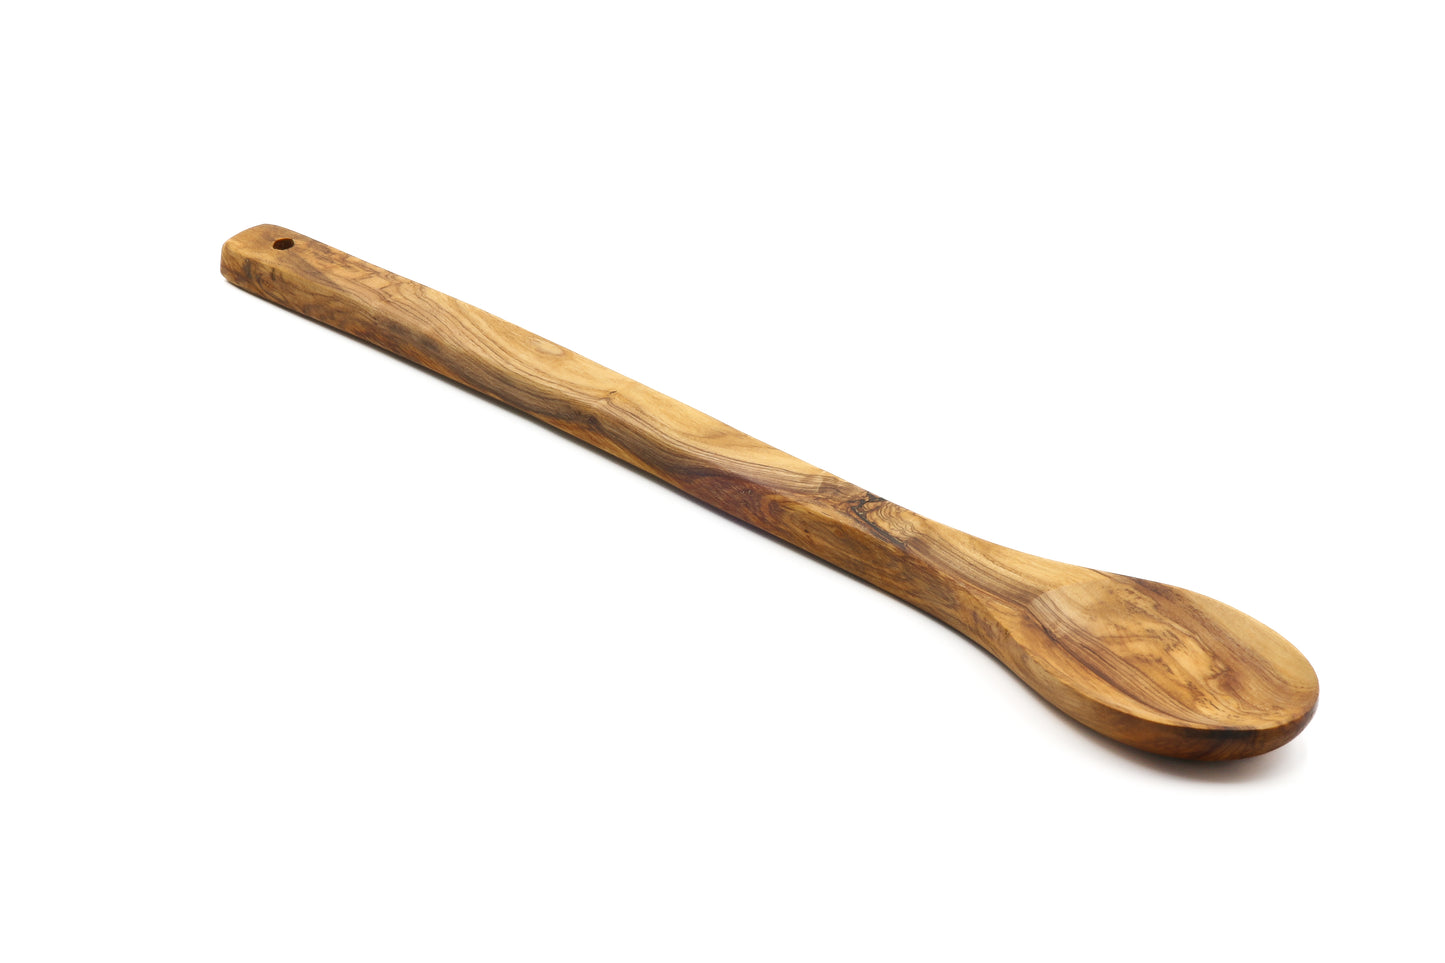 Cook with precision using this high-quality olive wood spoon